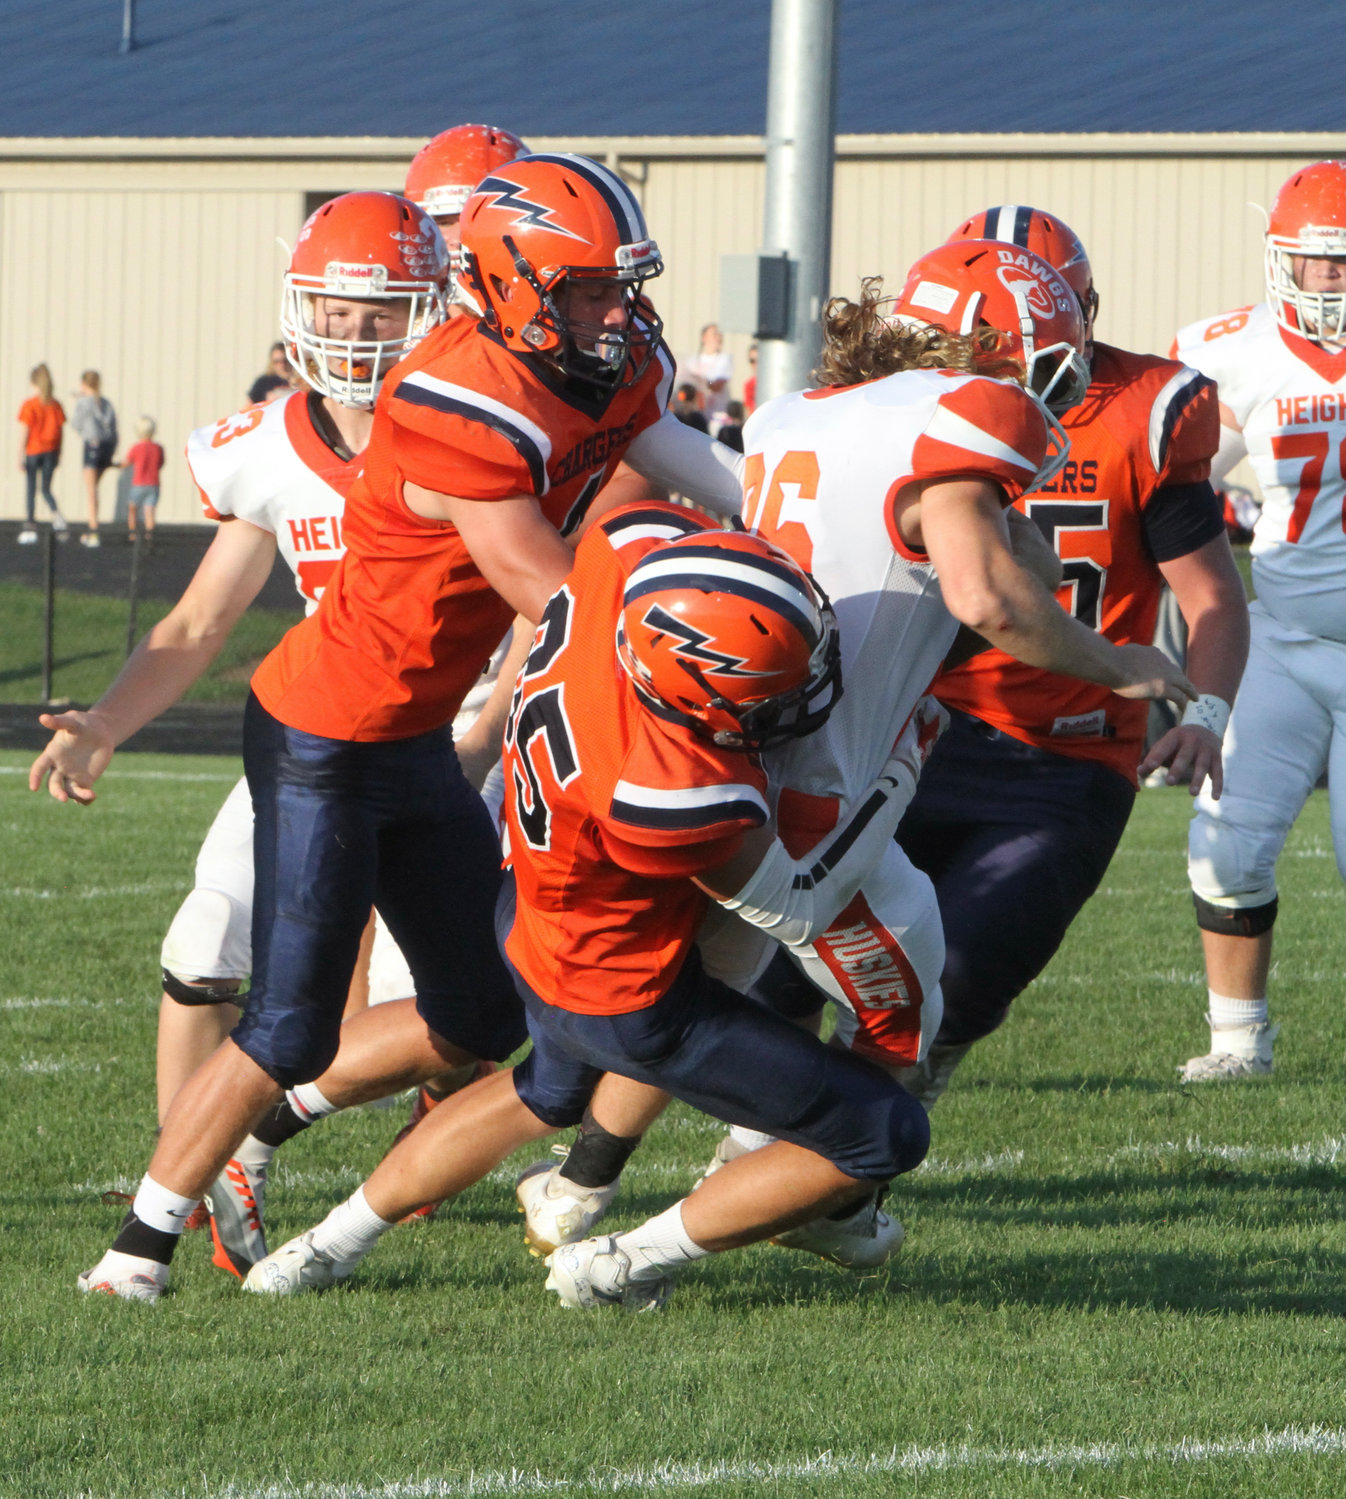 The North Montgomery defense swarms the Husky ball-carrier for the tackle.